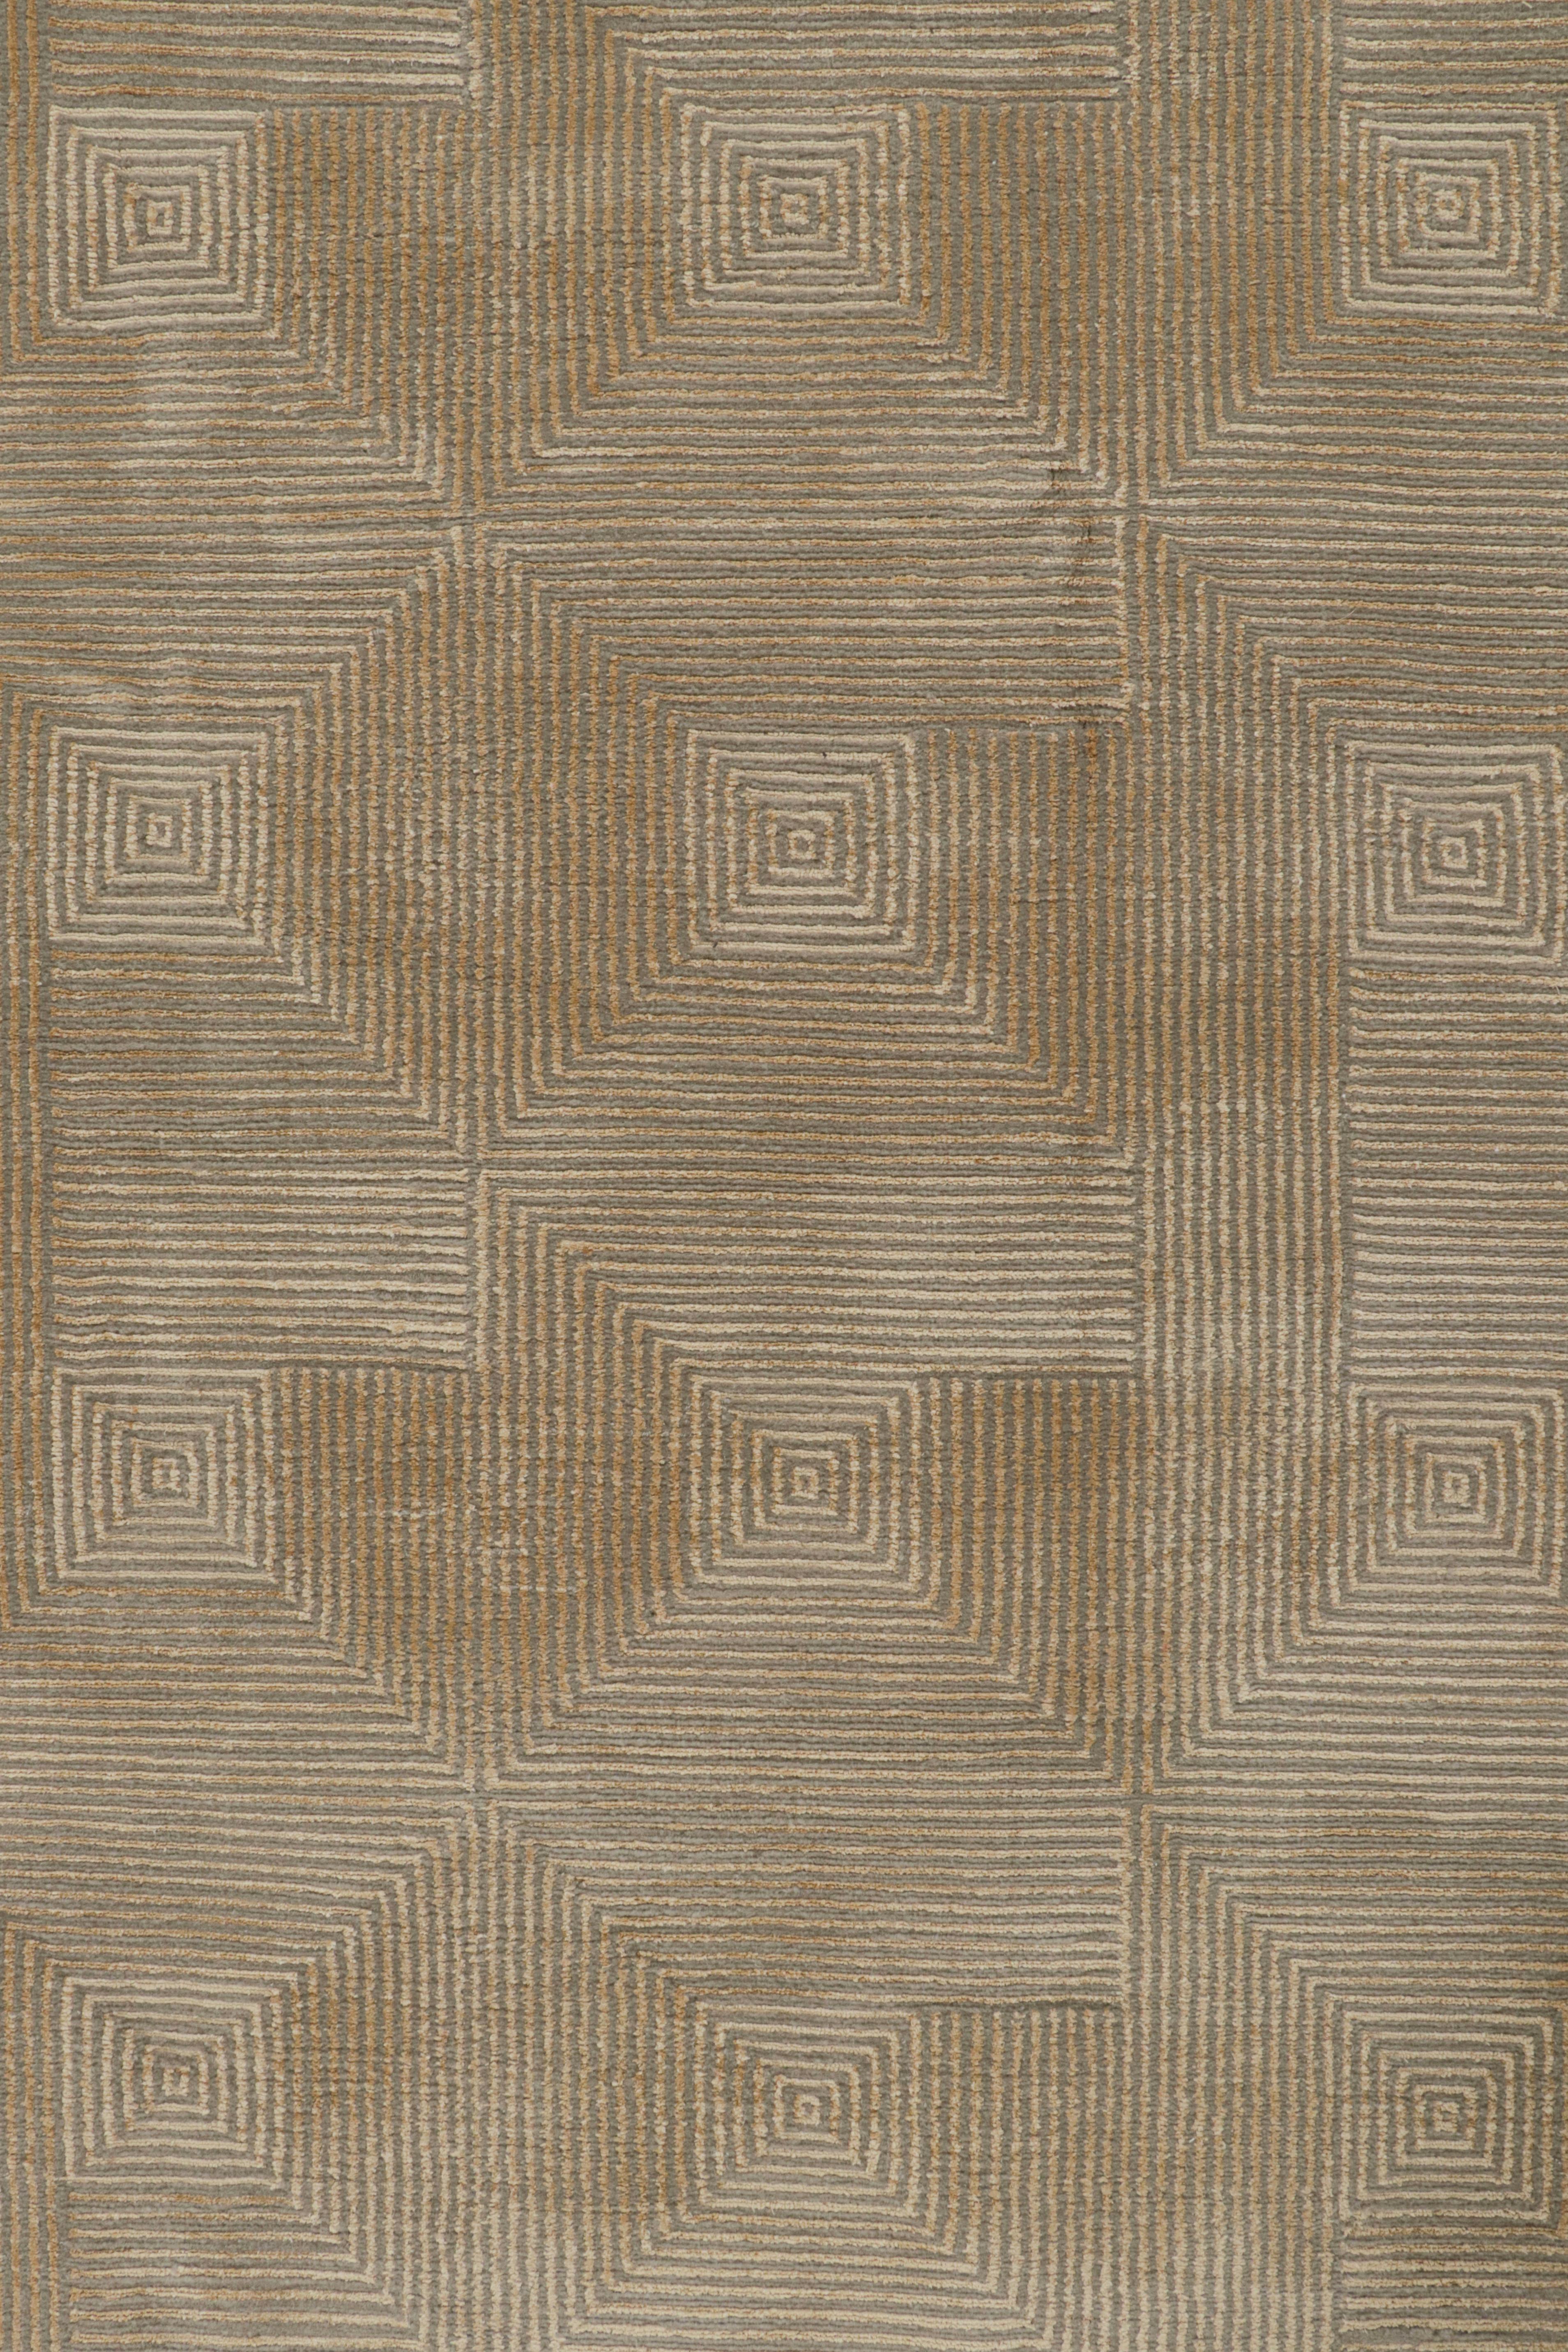 Contemporary Rug & Kilim’s Cubist Art Deco Style Rug in Beige-Brown Geometric Patterns For Sale